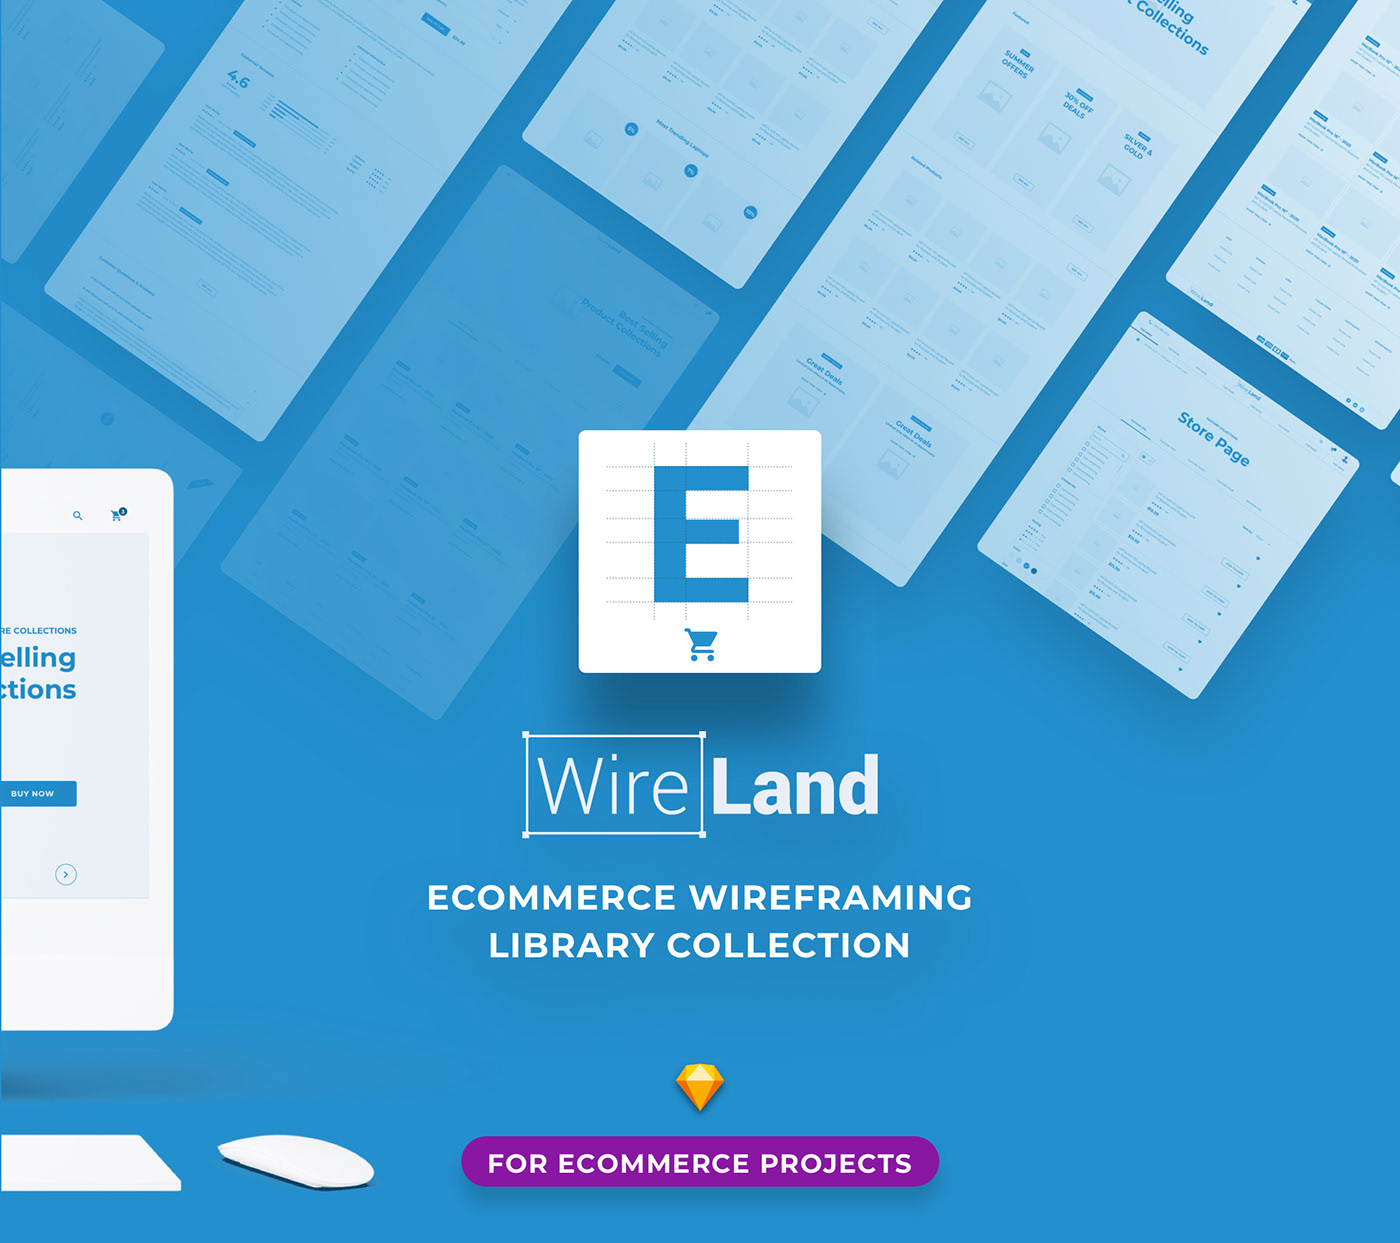 f74d6f65638705.5f81f16fa1a06 - Wireland for Ecommerce - Massive Wireframe Library Collection